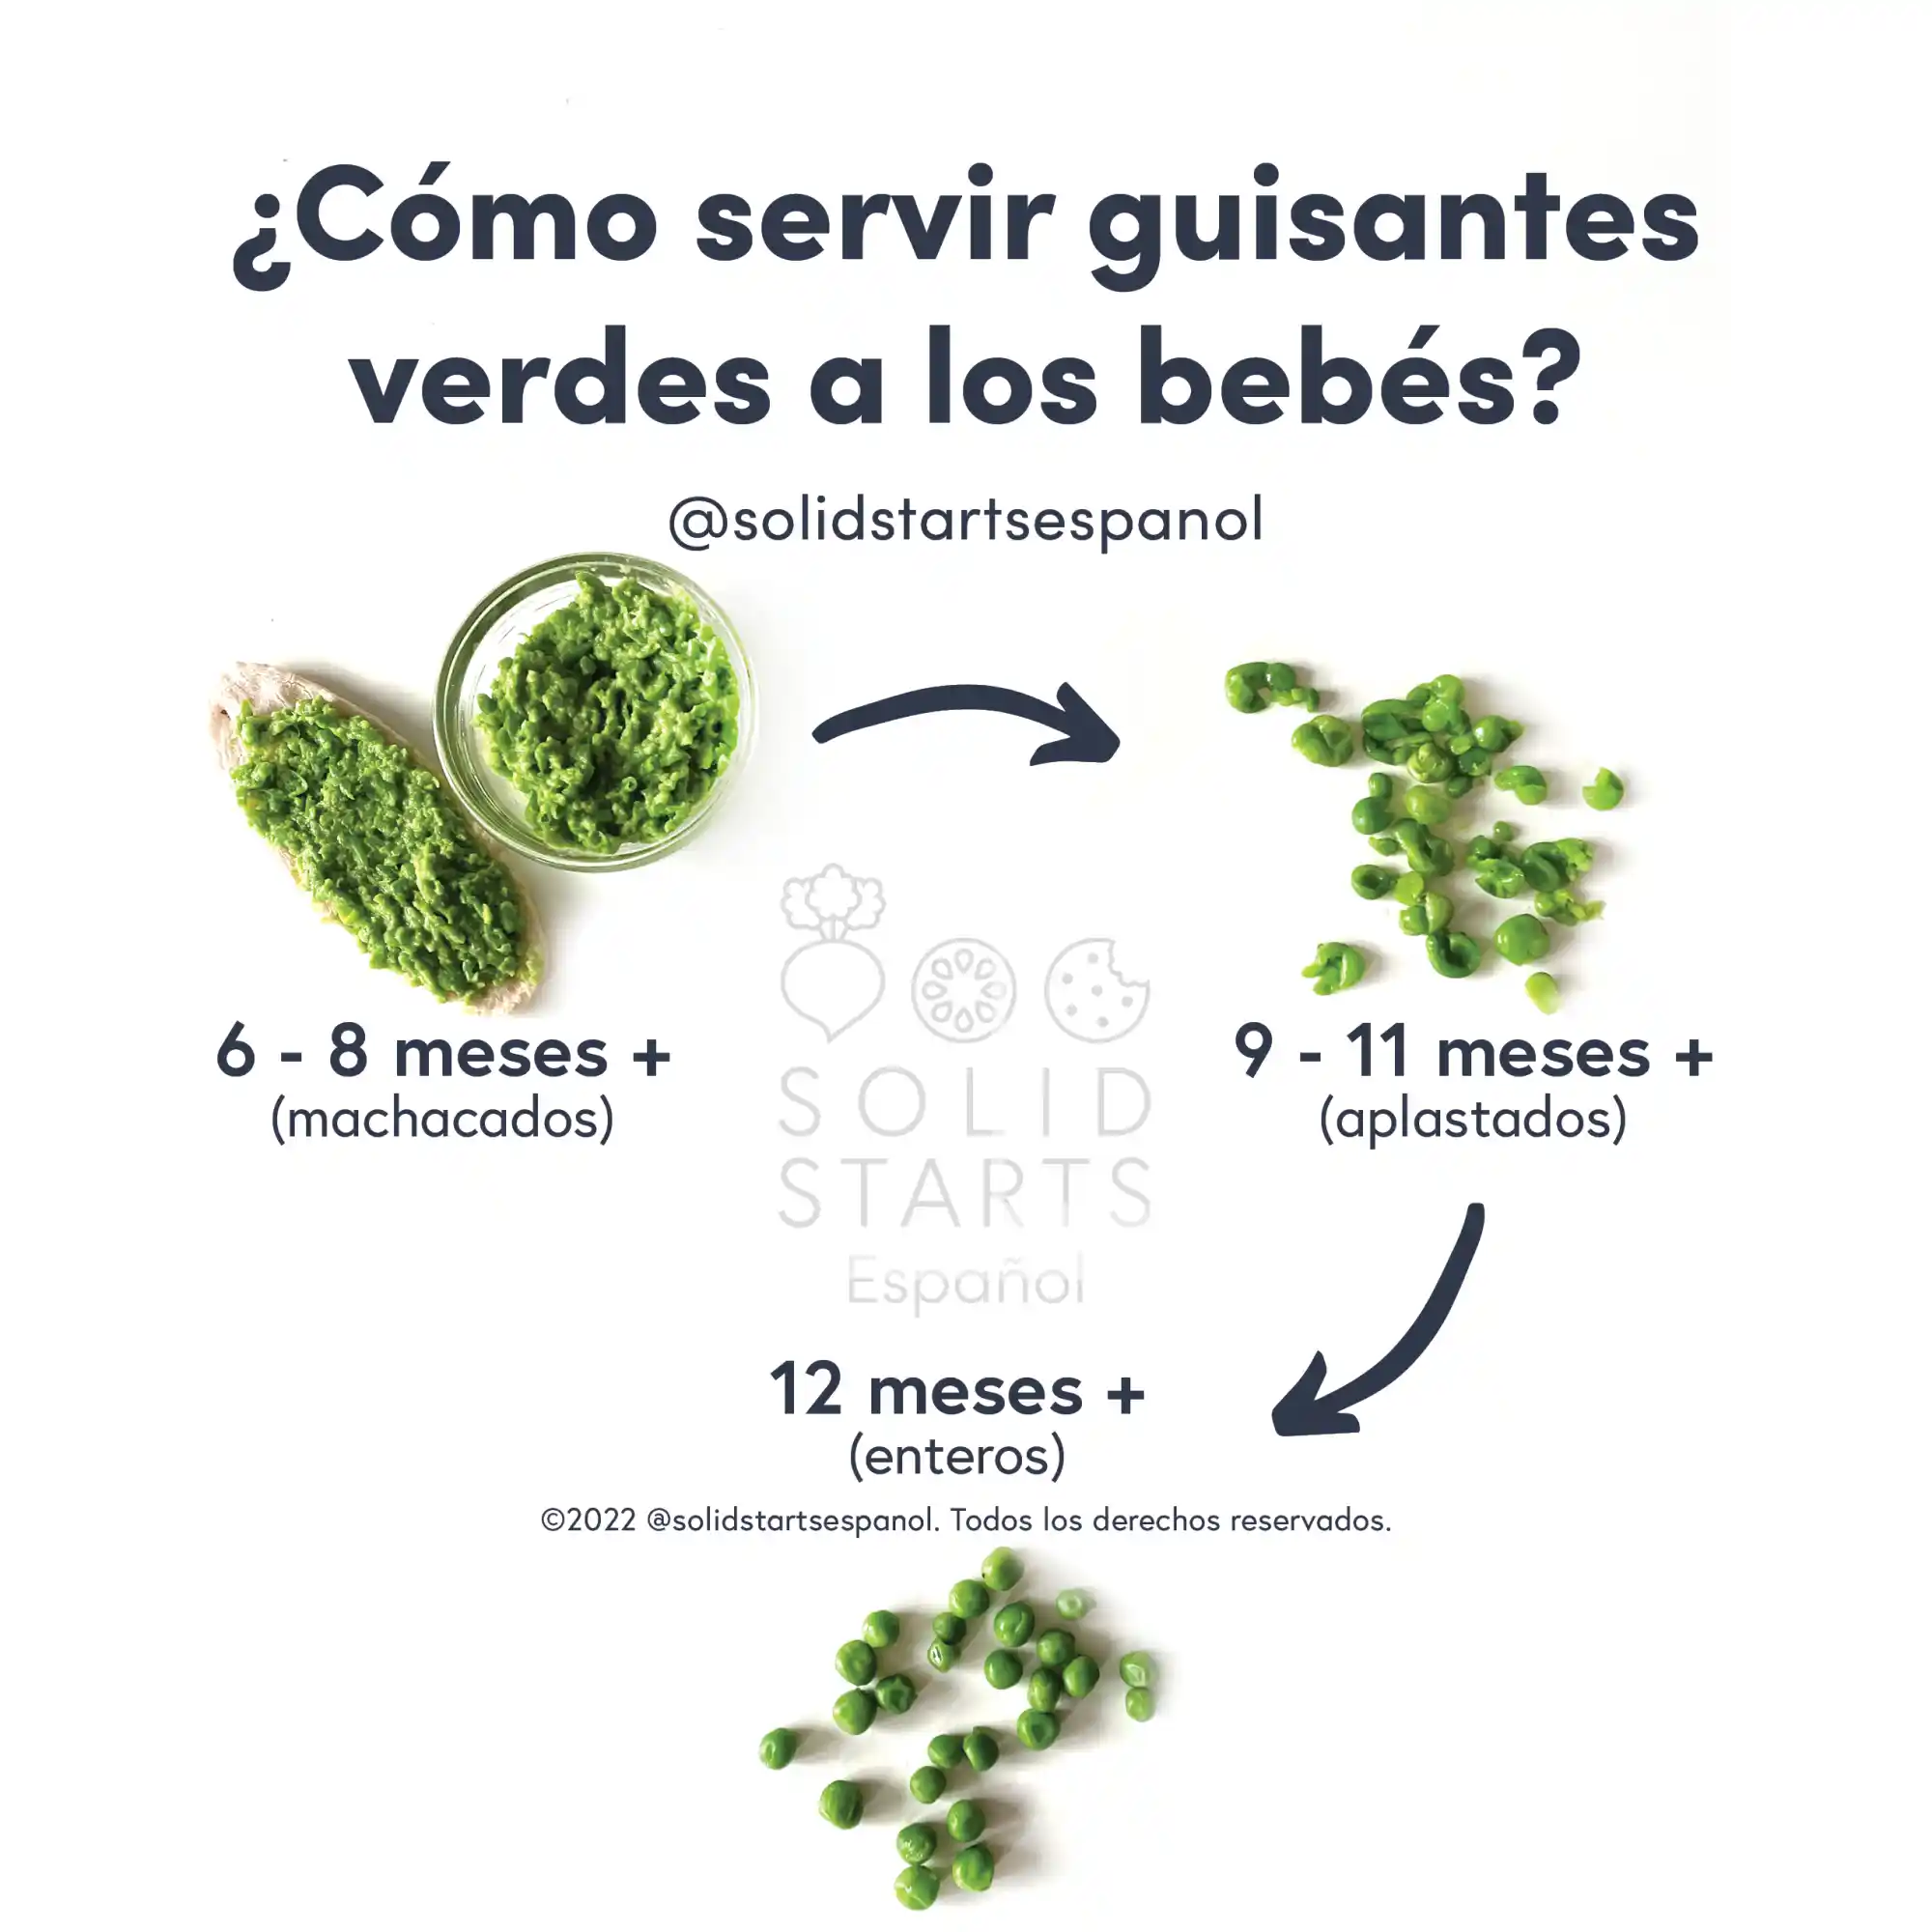 infographic showing how to offer peas to babies by age: blended into a mash for babies 6-8 months, flattened whole peas for babies 9-11 months, and whole peas for toddlers 12 months and older